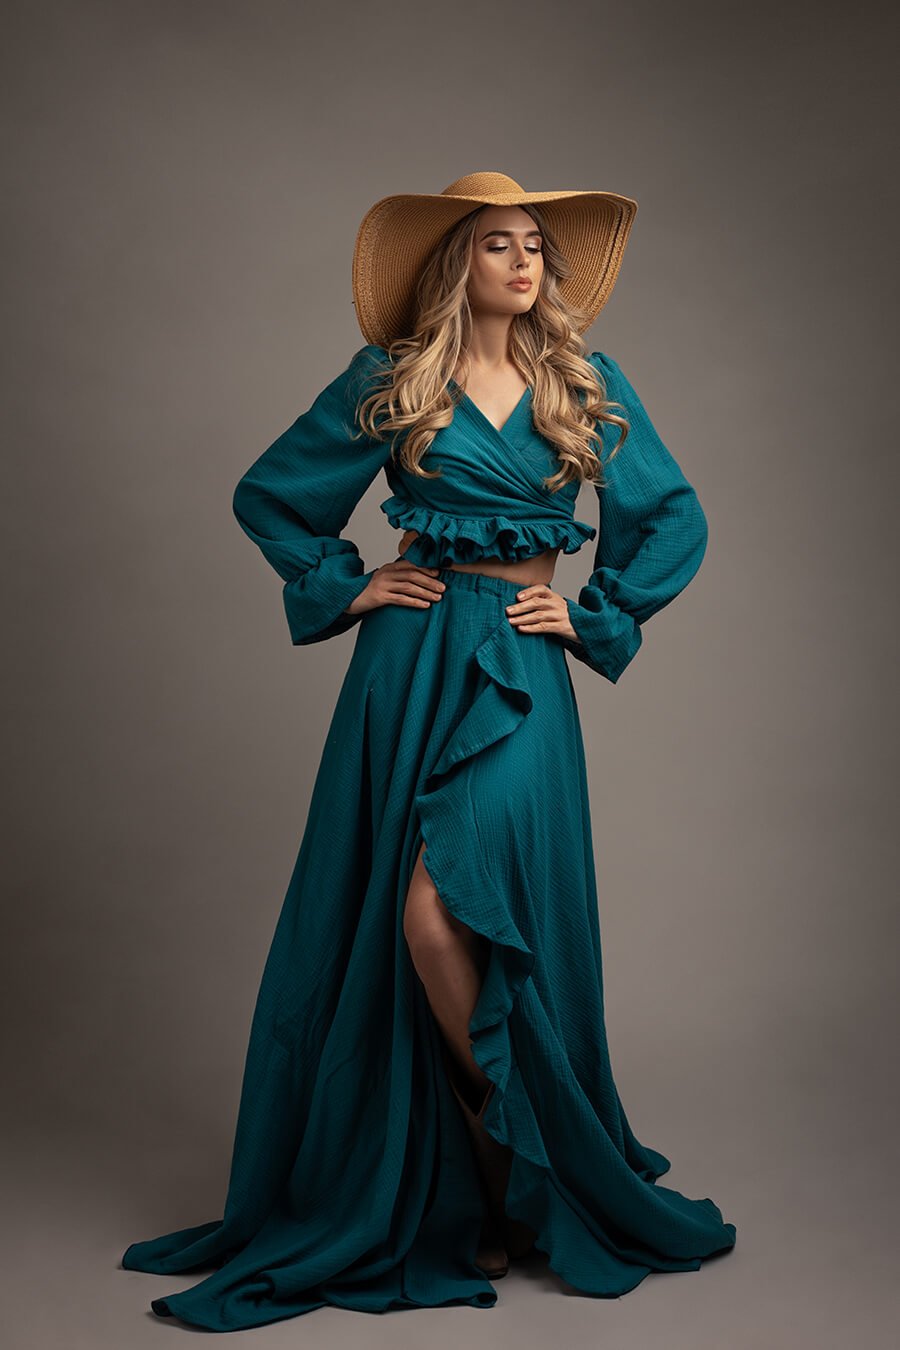 blond model poses in a studio wearing a boho western chic set in petrol color. she wears a top with ruffle details and long sleeves. she has a skirt with ruffle details to match the style and a brown hat on her head. 